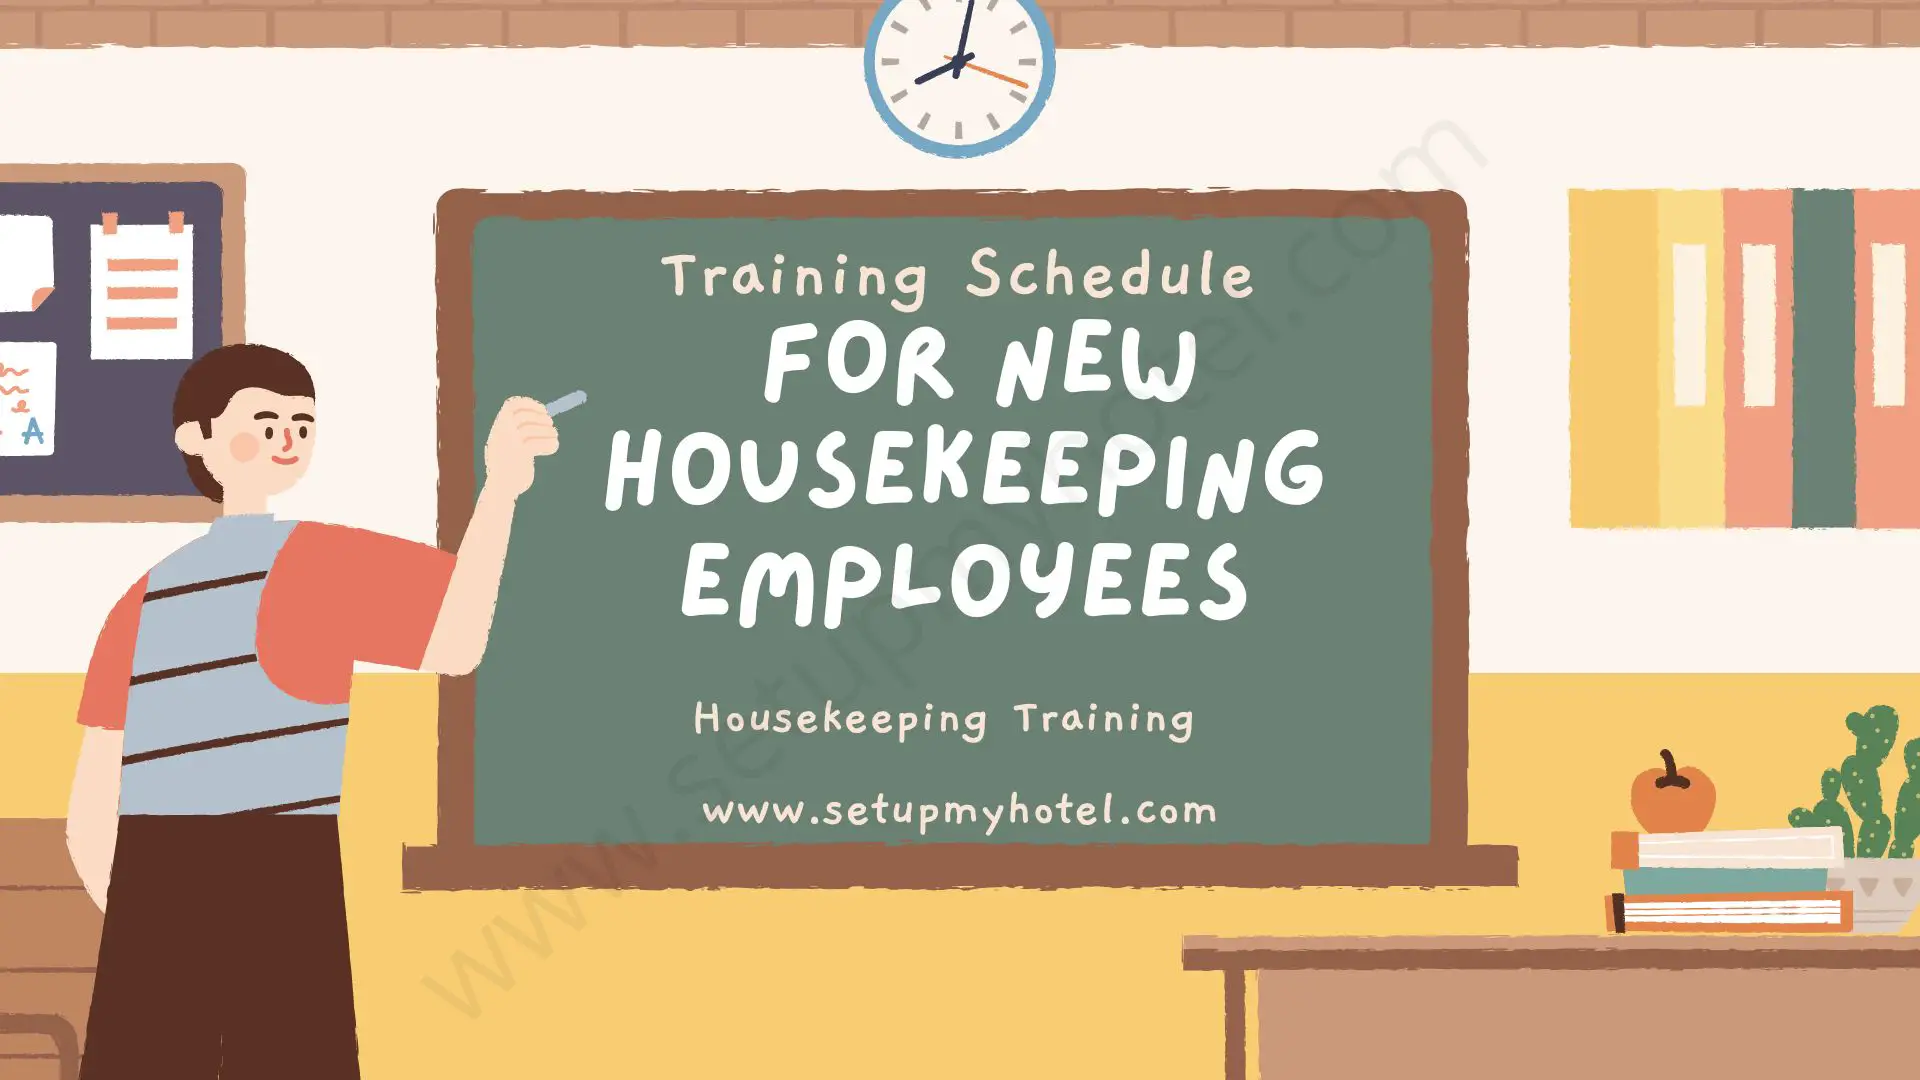 As a new housekeeping employee, you will undergo a comprehensive training schedule to ensure that you are fully equipped with the skills and knowledge required to carry out your role effectively. Our training program is designed to provide you with a thorough understanding of our company's policies, procedures, and standards. The first phase of the training will cover the basics of housekeeping, including cleaning techniques, handling cleaning equipment and supplies, and identifying and reporting maintenance issues. You will also learn how to interact with guests and handle their requests and complaints. The second phase of the training will focus on the specific duties and responsibilities of your role, including cleaning guest rooms, public areas, and back-of-house areas, as well as restocking supplies and amenities. Throughout the training program, you will be paired with an experienced housekeeper who will serve as your mentor and guide. You will also have access to online resources and training materials to assist you in your learning. Upon completion of the training program, you will be ready to provide our guests with the highest level of cleanliness and comfort during their stay. We are committed to providing you with ongoing training and support to ensure that you continue to develop your skills and grow as an employee of our company.